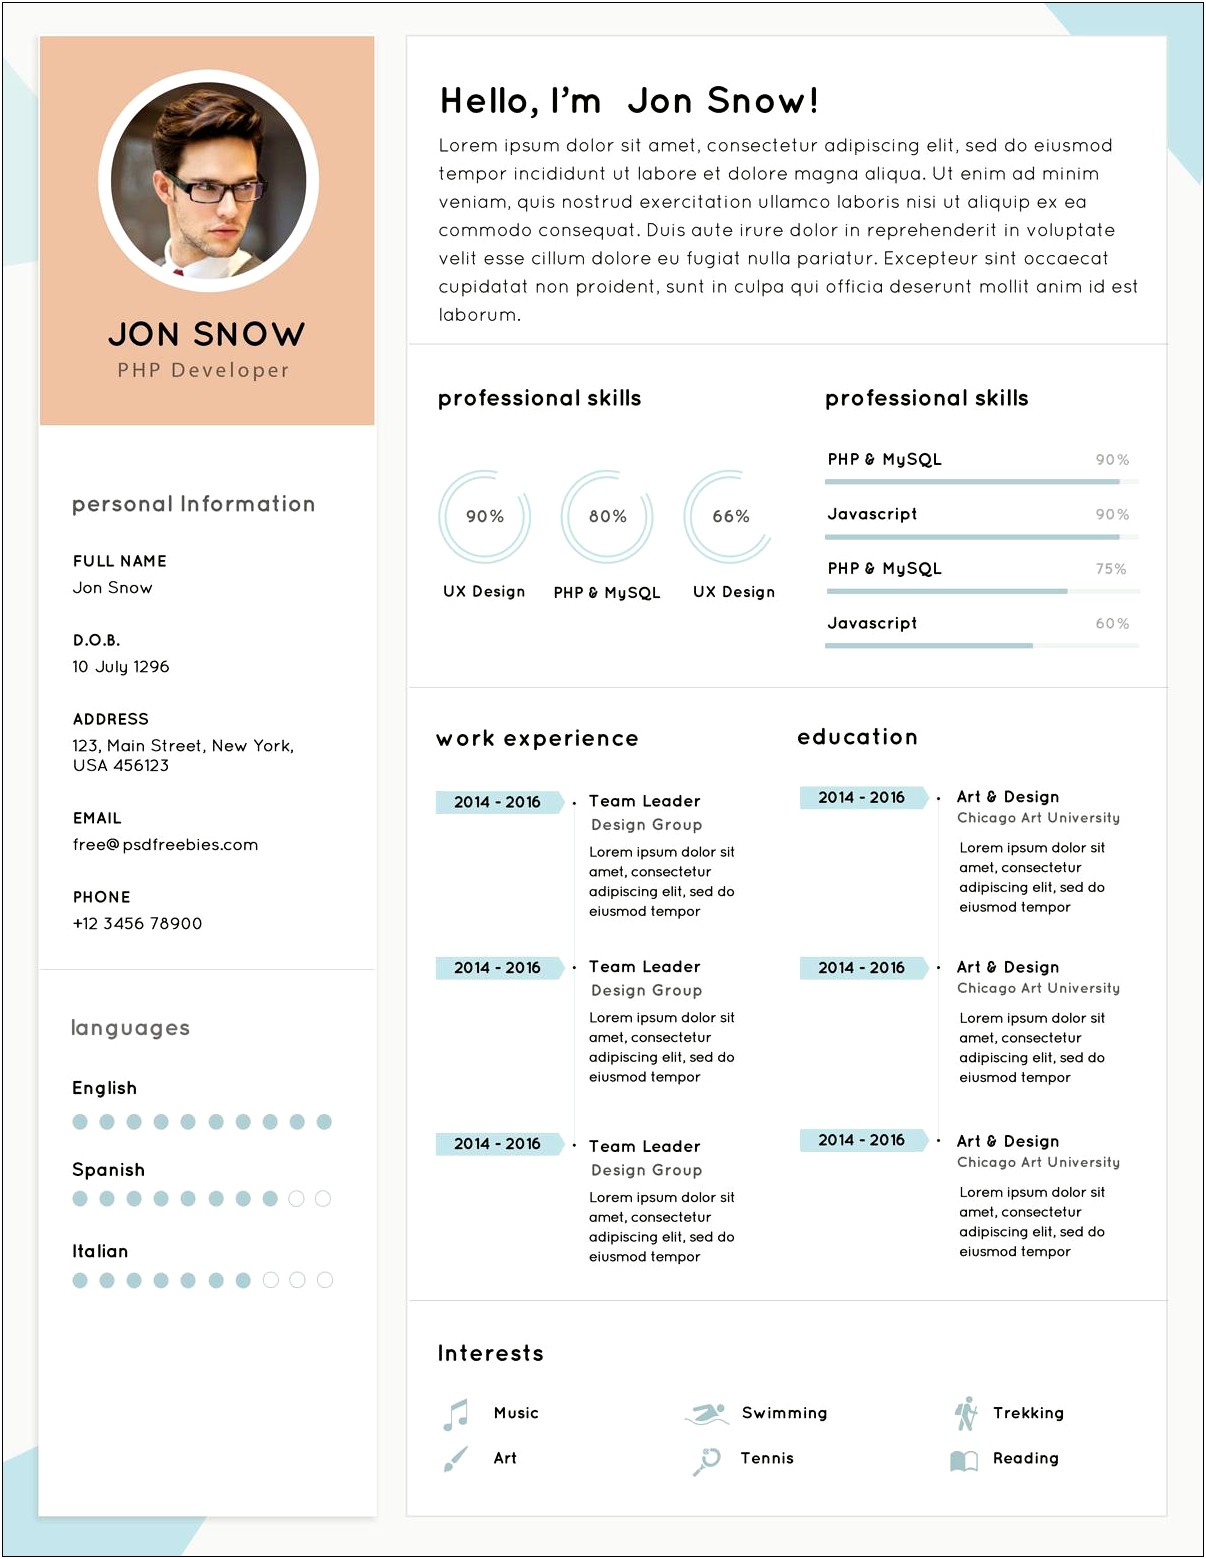 Sample Resume For Experienced Php Developer Free Download